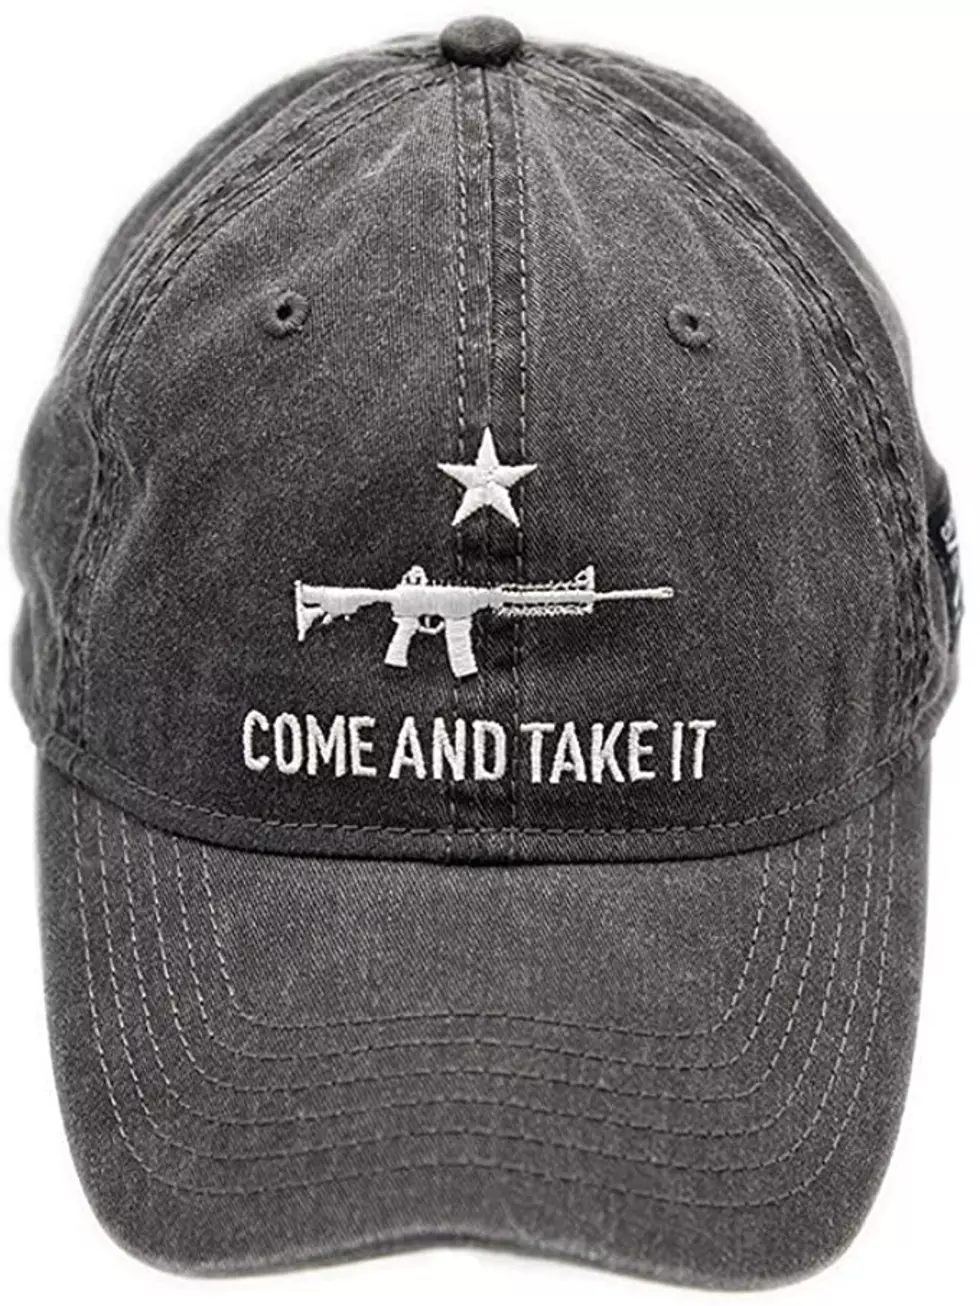 Hat Day Controversy: Durand Family Suing School After Third Grader’s AR-15 Hat Shot Down